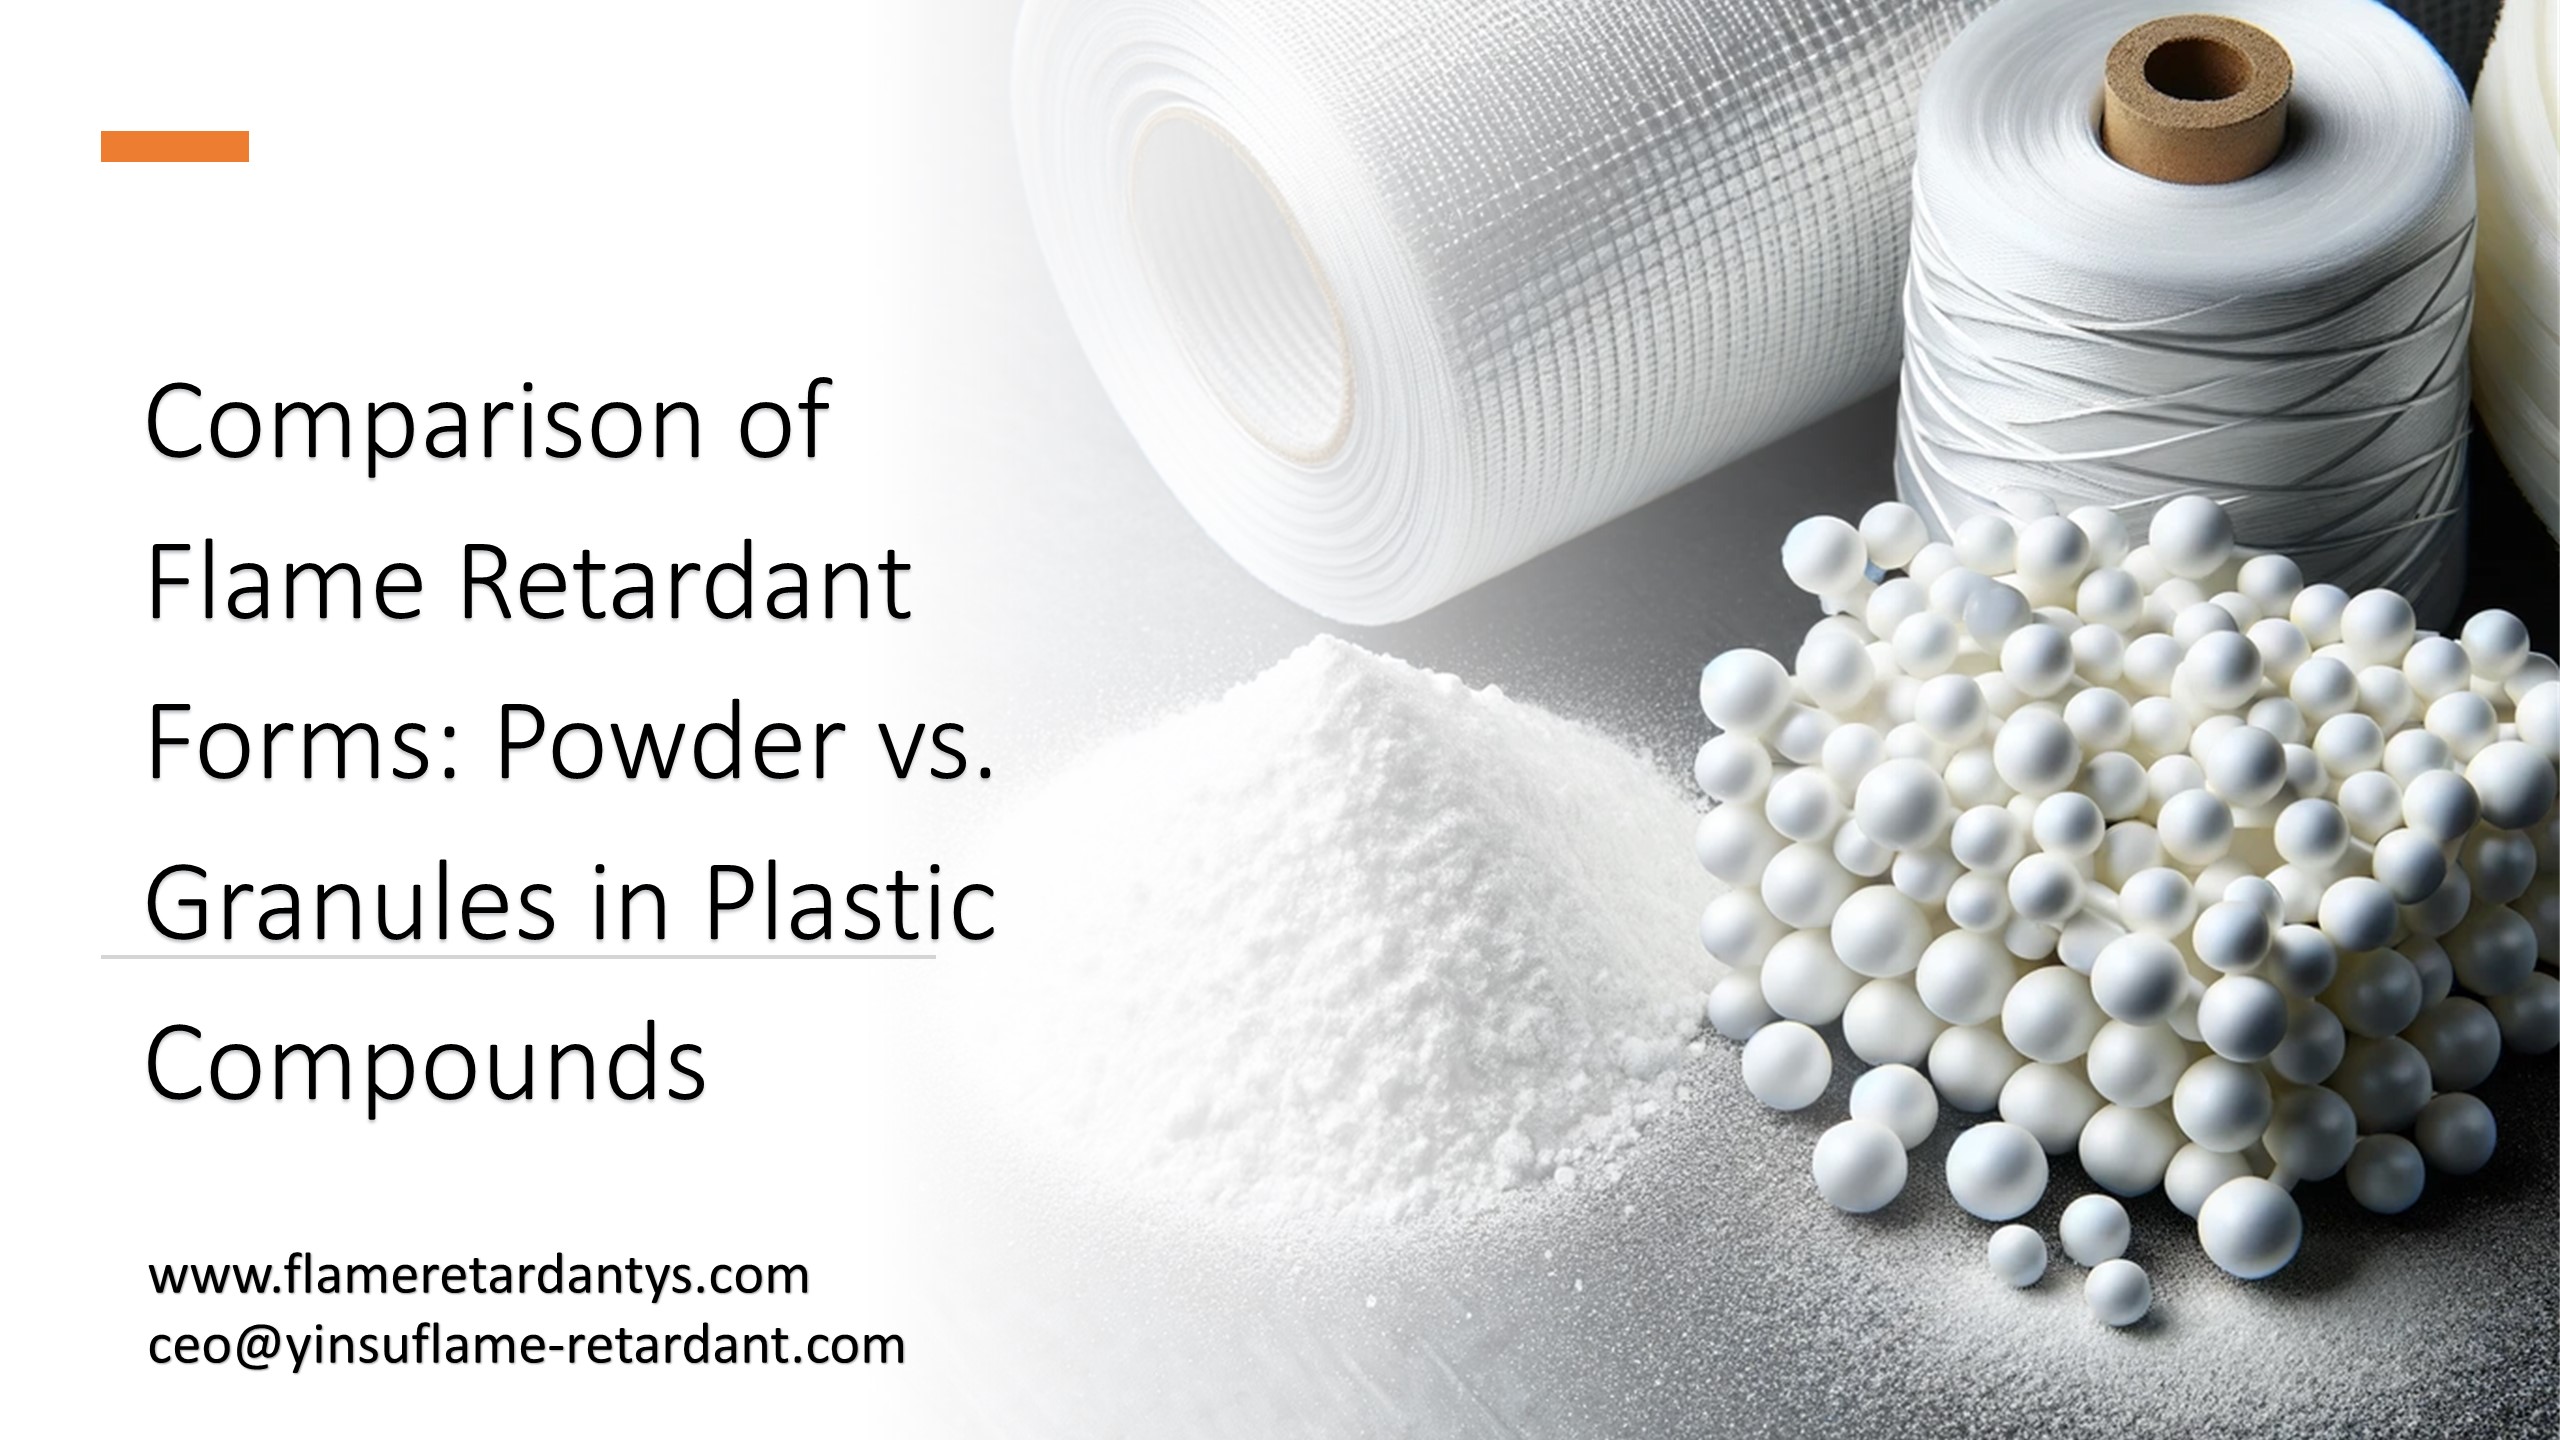 Comparison of Flame Retardant Forms: Powder Vs. Granules in Modified Material Compounds